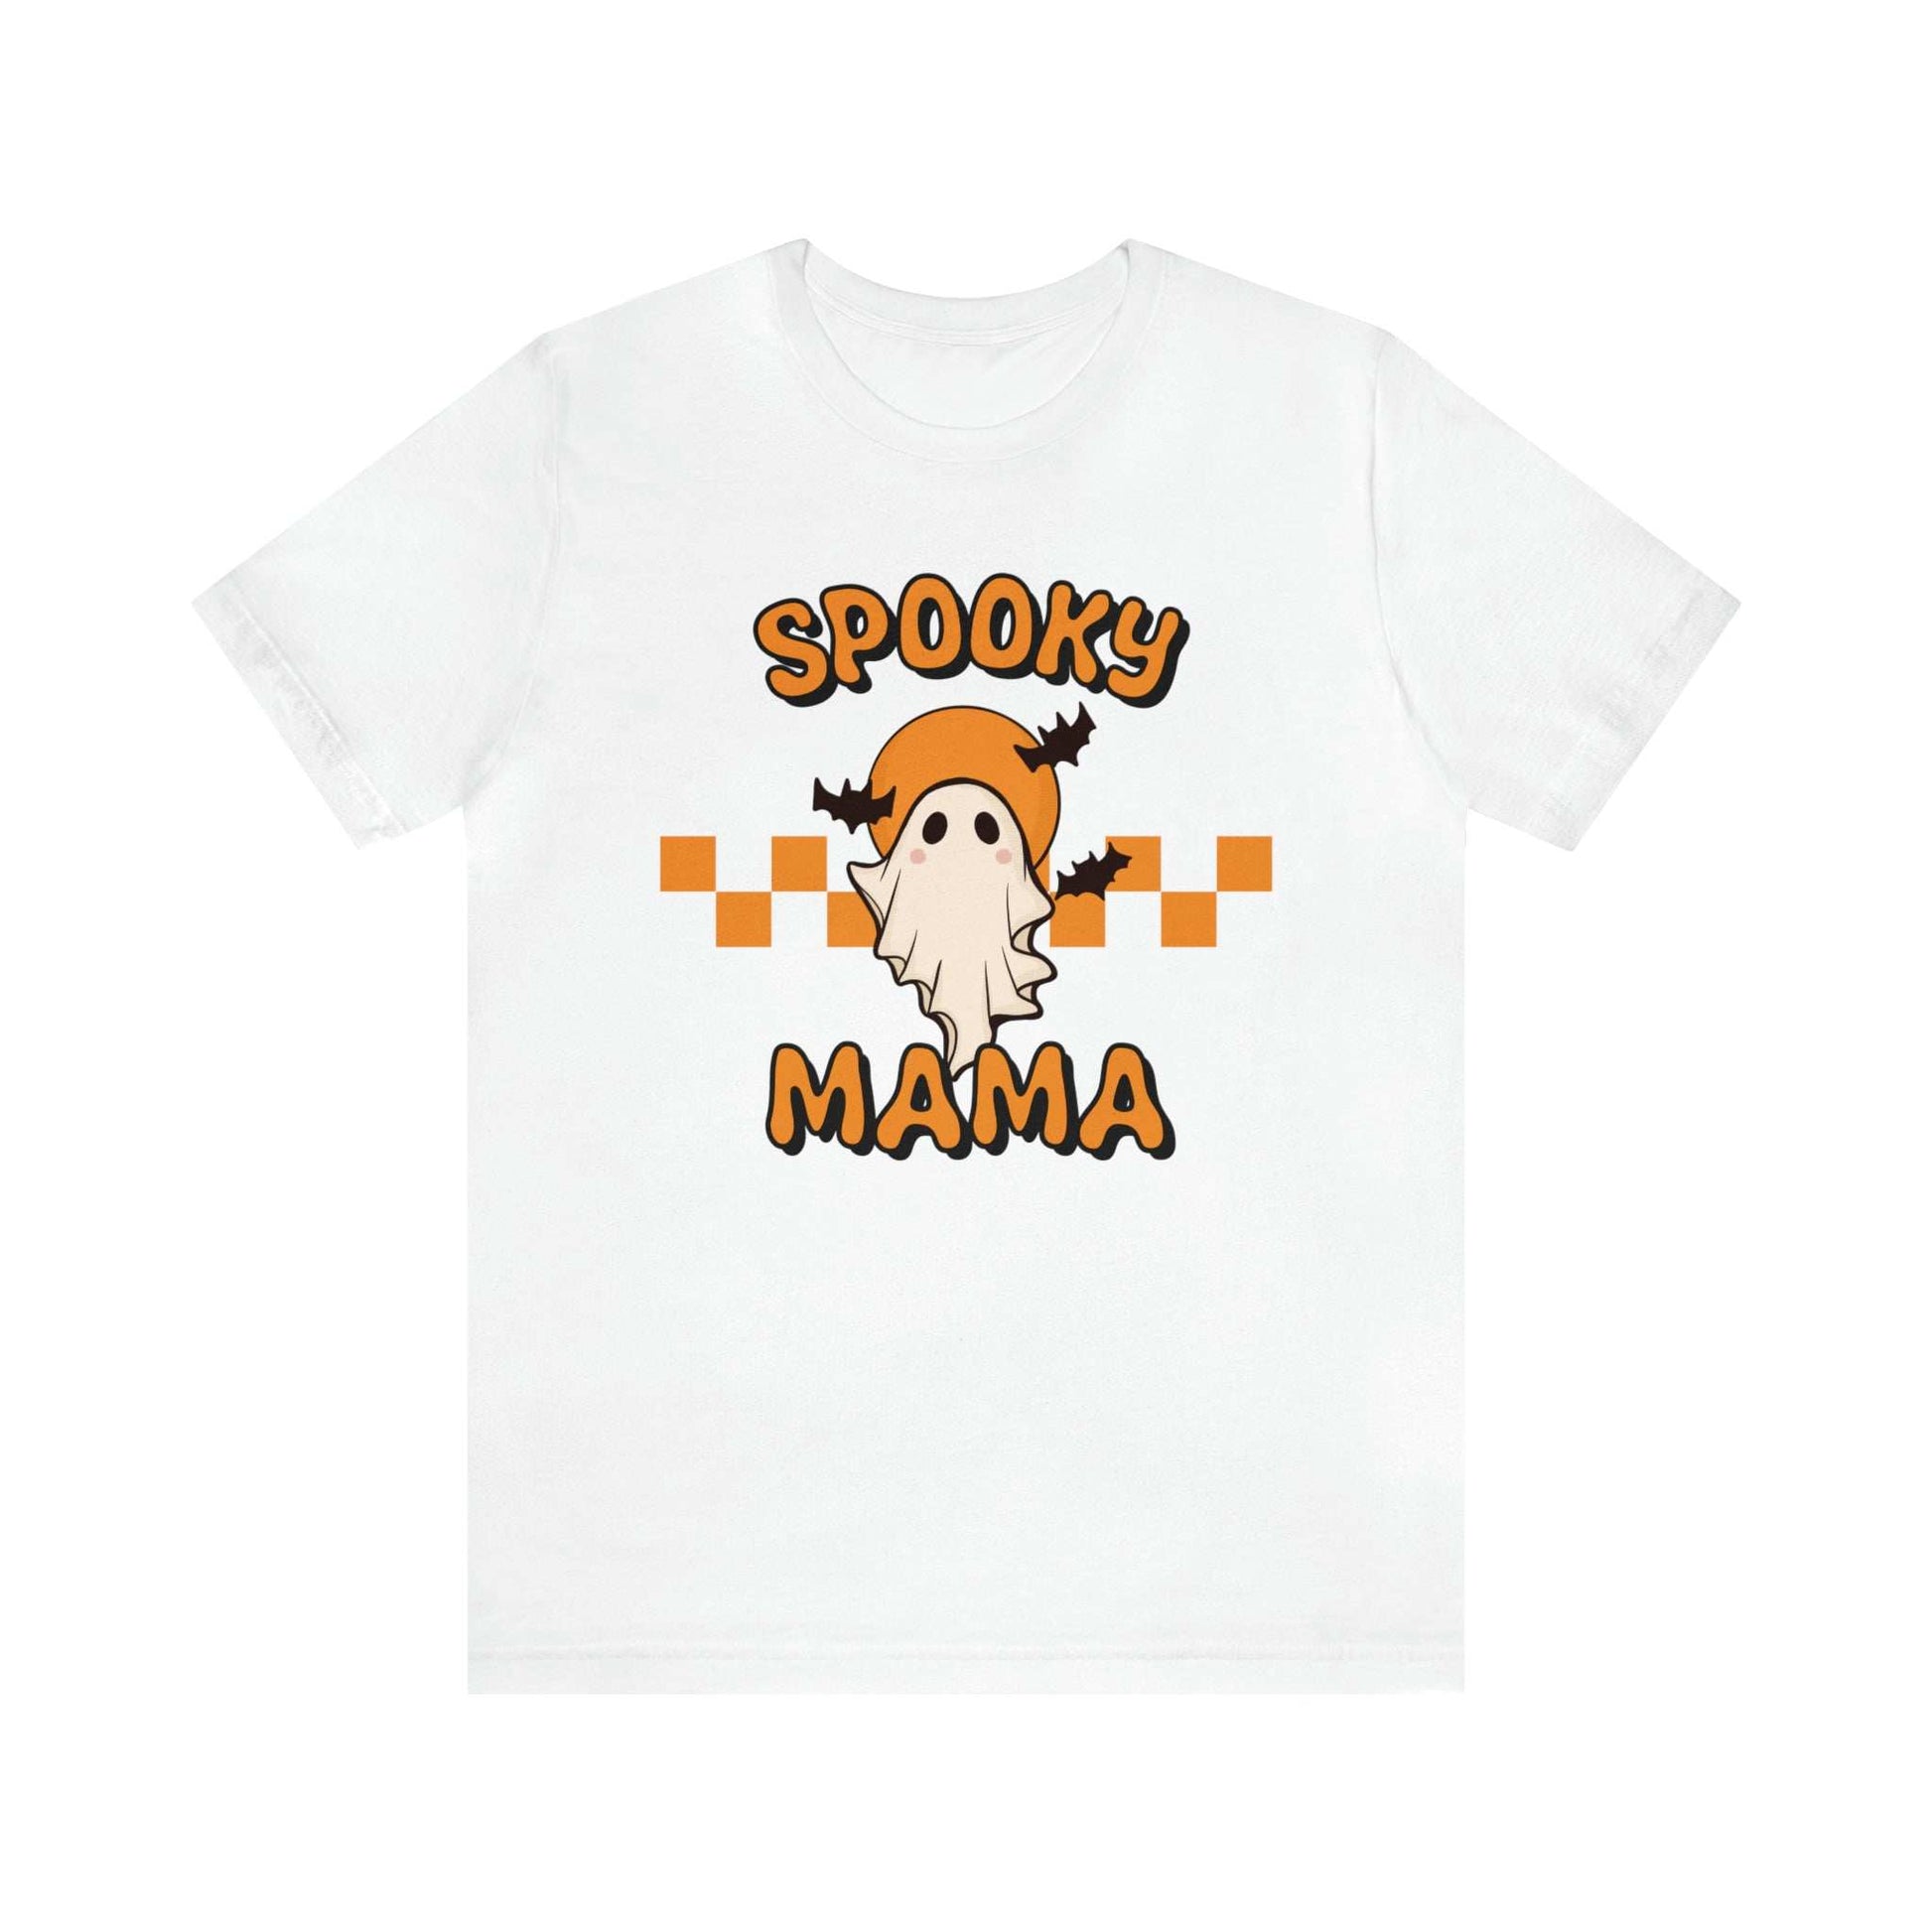 Spooky Mama Short Sleeve TeeWolfe Paw DesignsSpooky Mama Short Sleeve TeeHalloween vibes👻
Check out our Spooky Mama sweater!
Order a size larger for oversized look.
 
Light fabric (4.2 oz/yd² (142 g/m²))Runs true to size
Bella Canvas UniSpooky Mama Short Sleeve Tee